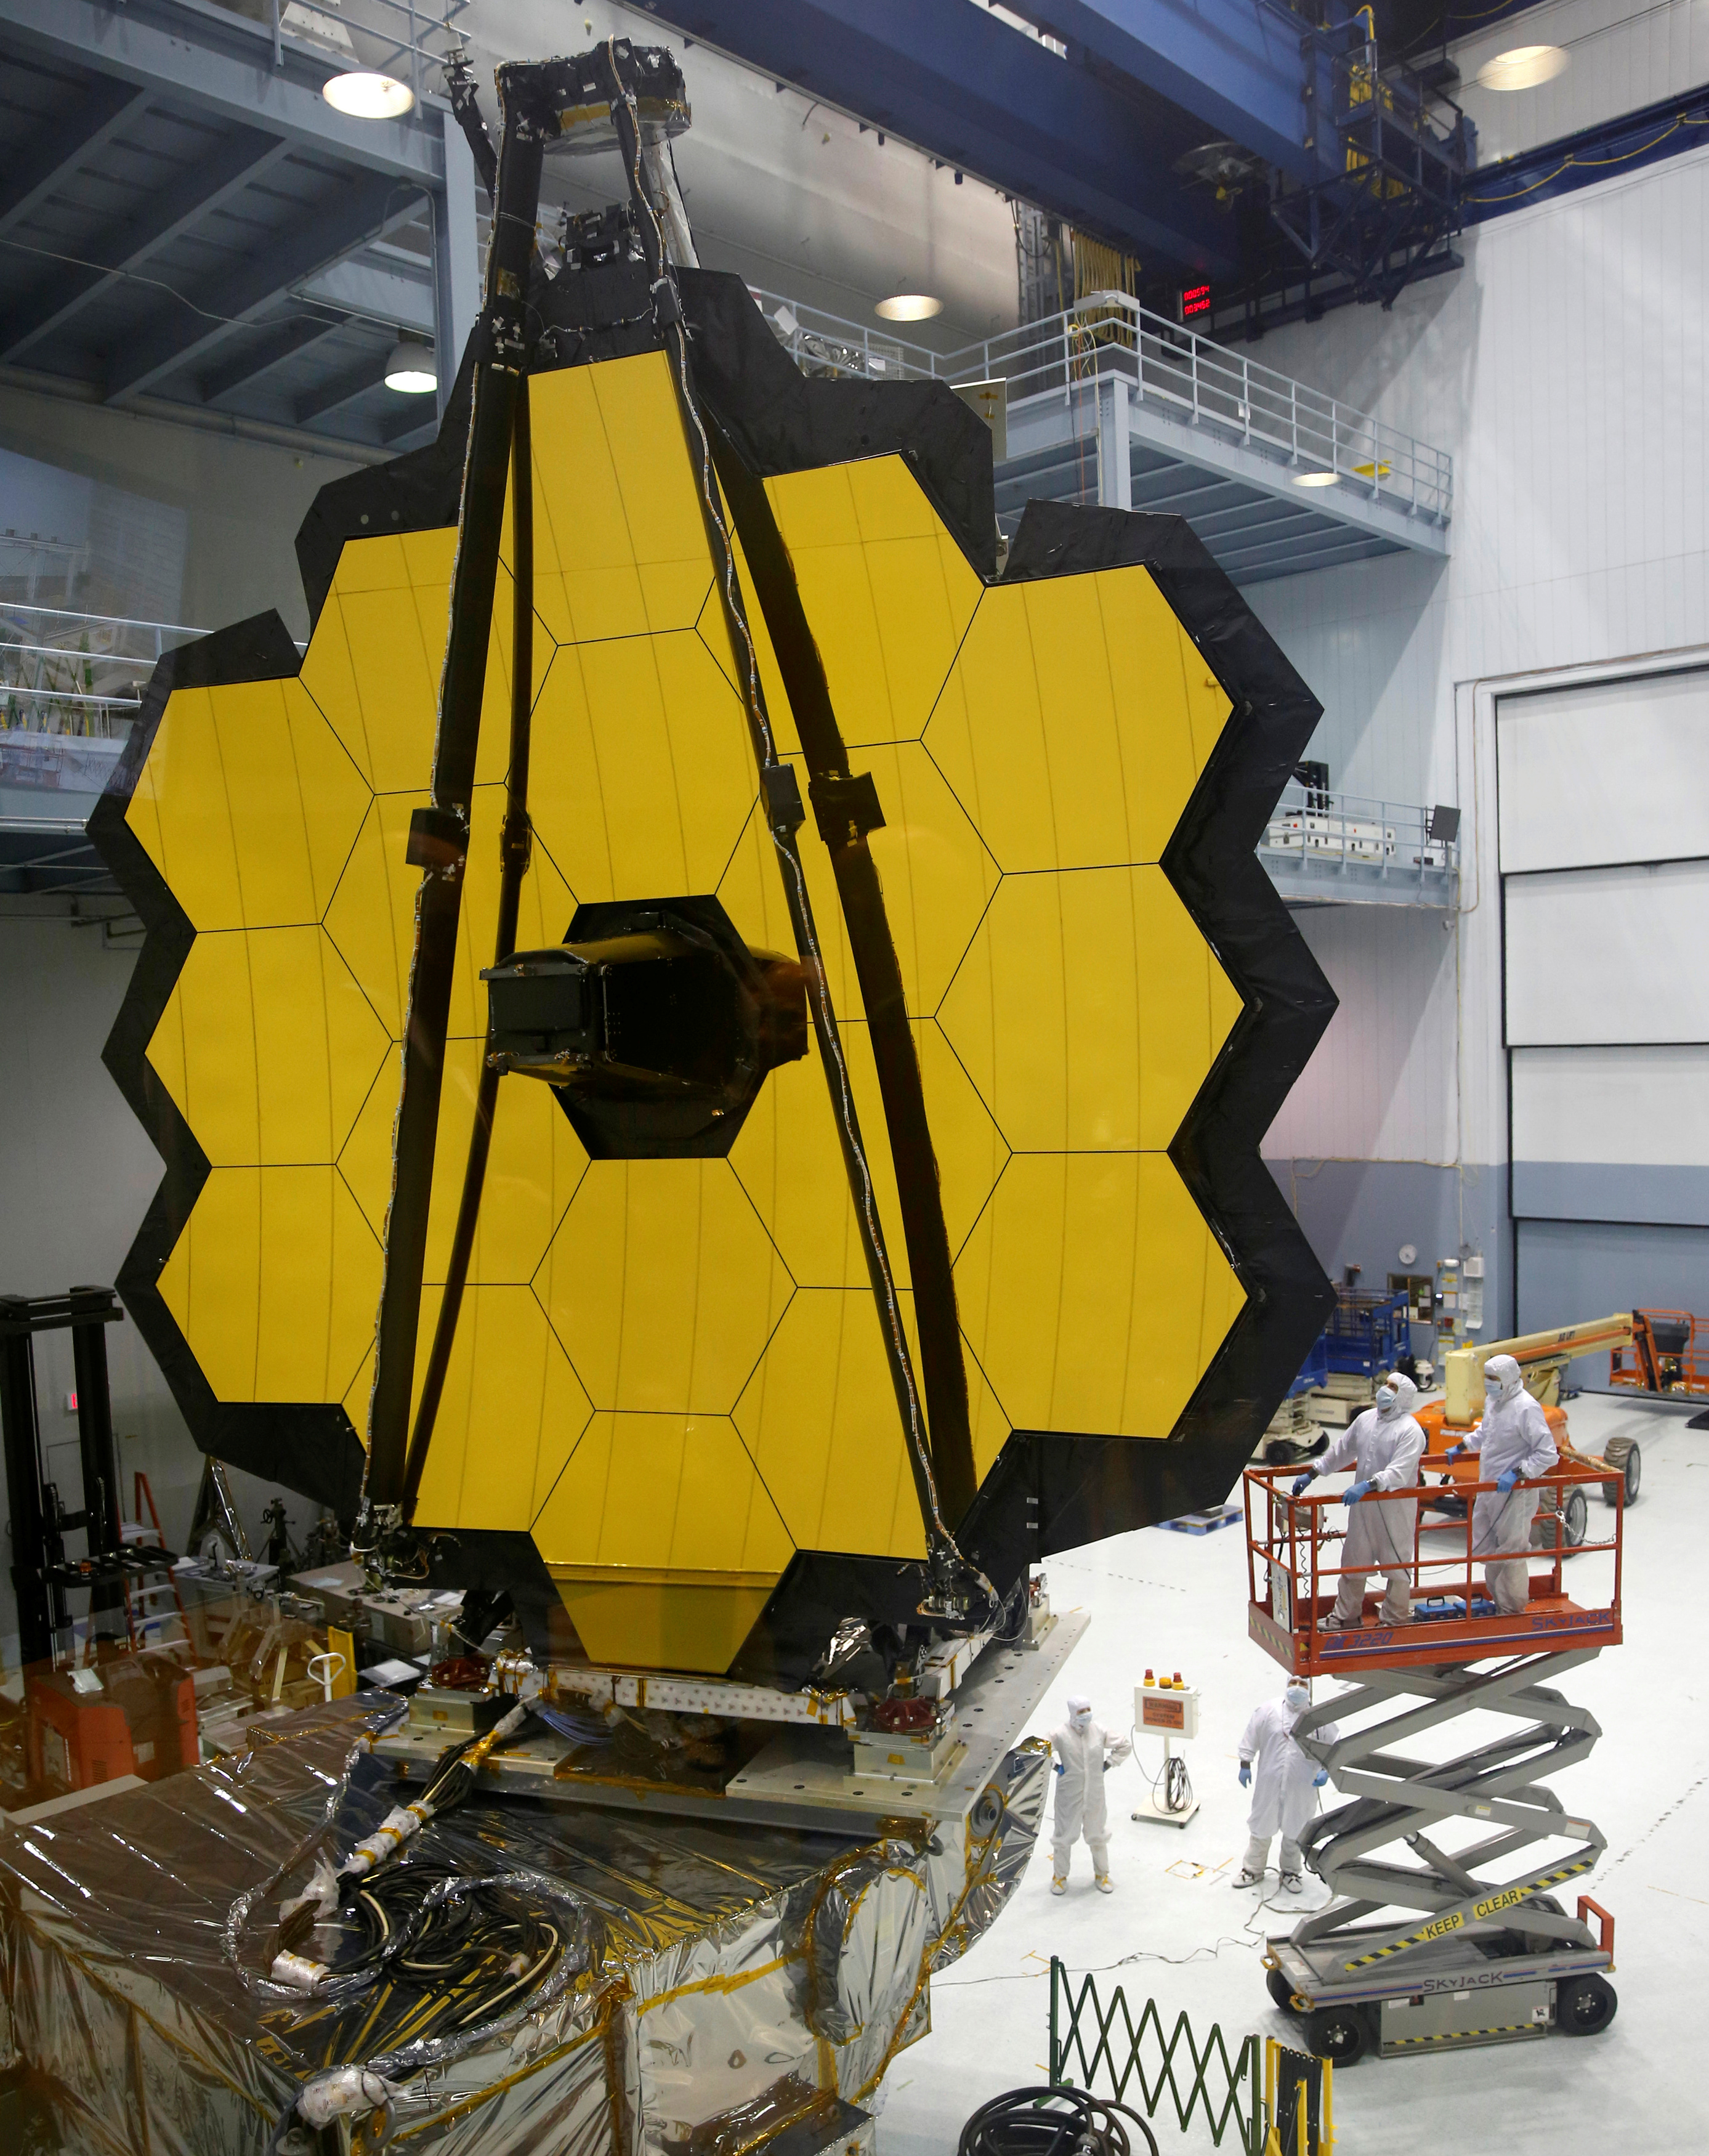 NASA workers look up at the James Webb Space Telescope Mirror during it's media reveal at NASAís Goddard Space Flight Center at Greenbelt, Maryland on Nov. 2, 2016. (Kevin Lamarque—Reuters)